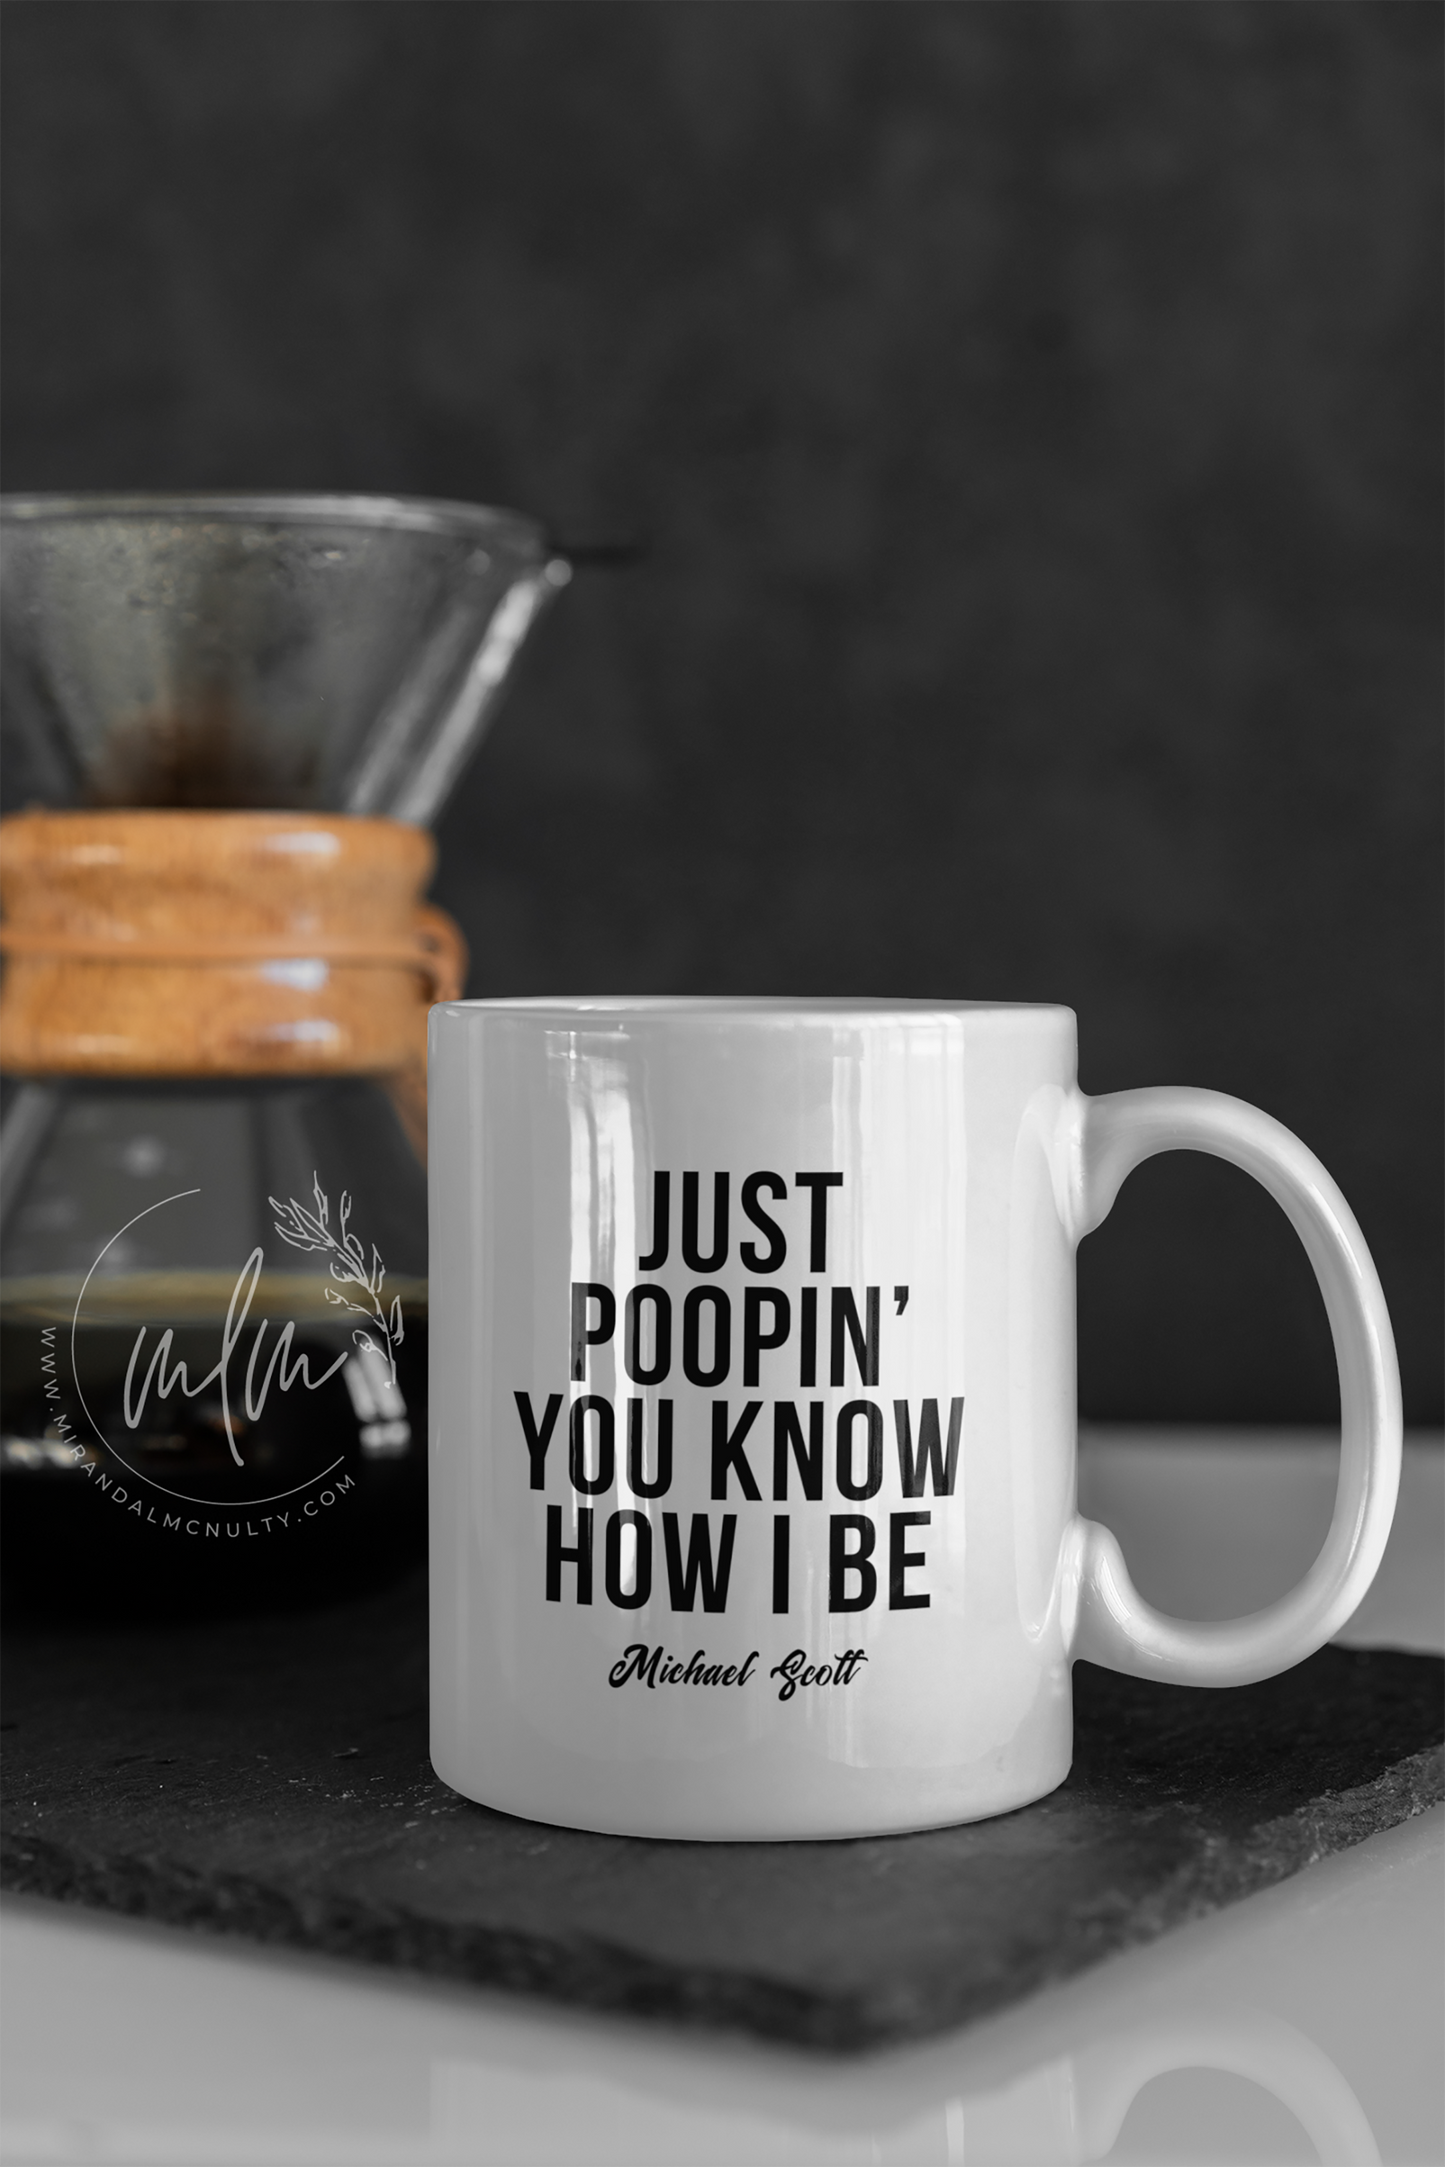 The Office Mug | Just Poopin' You Know How I Be - Michael Scott